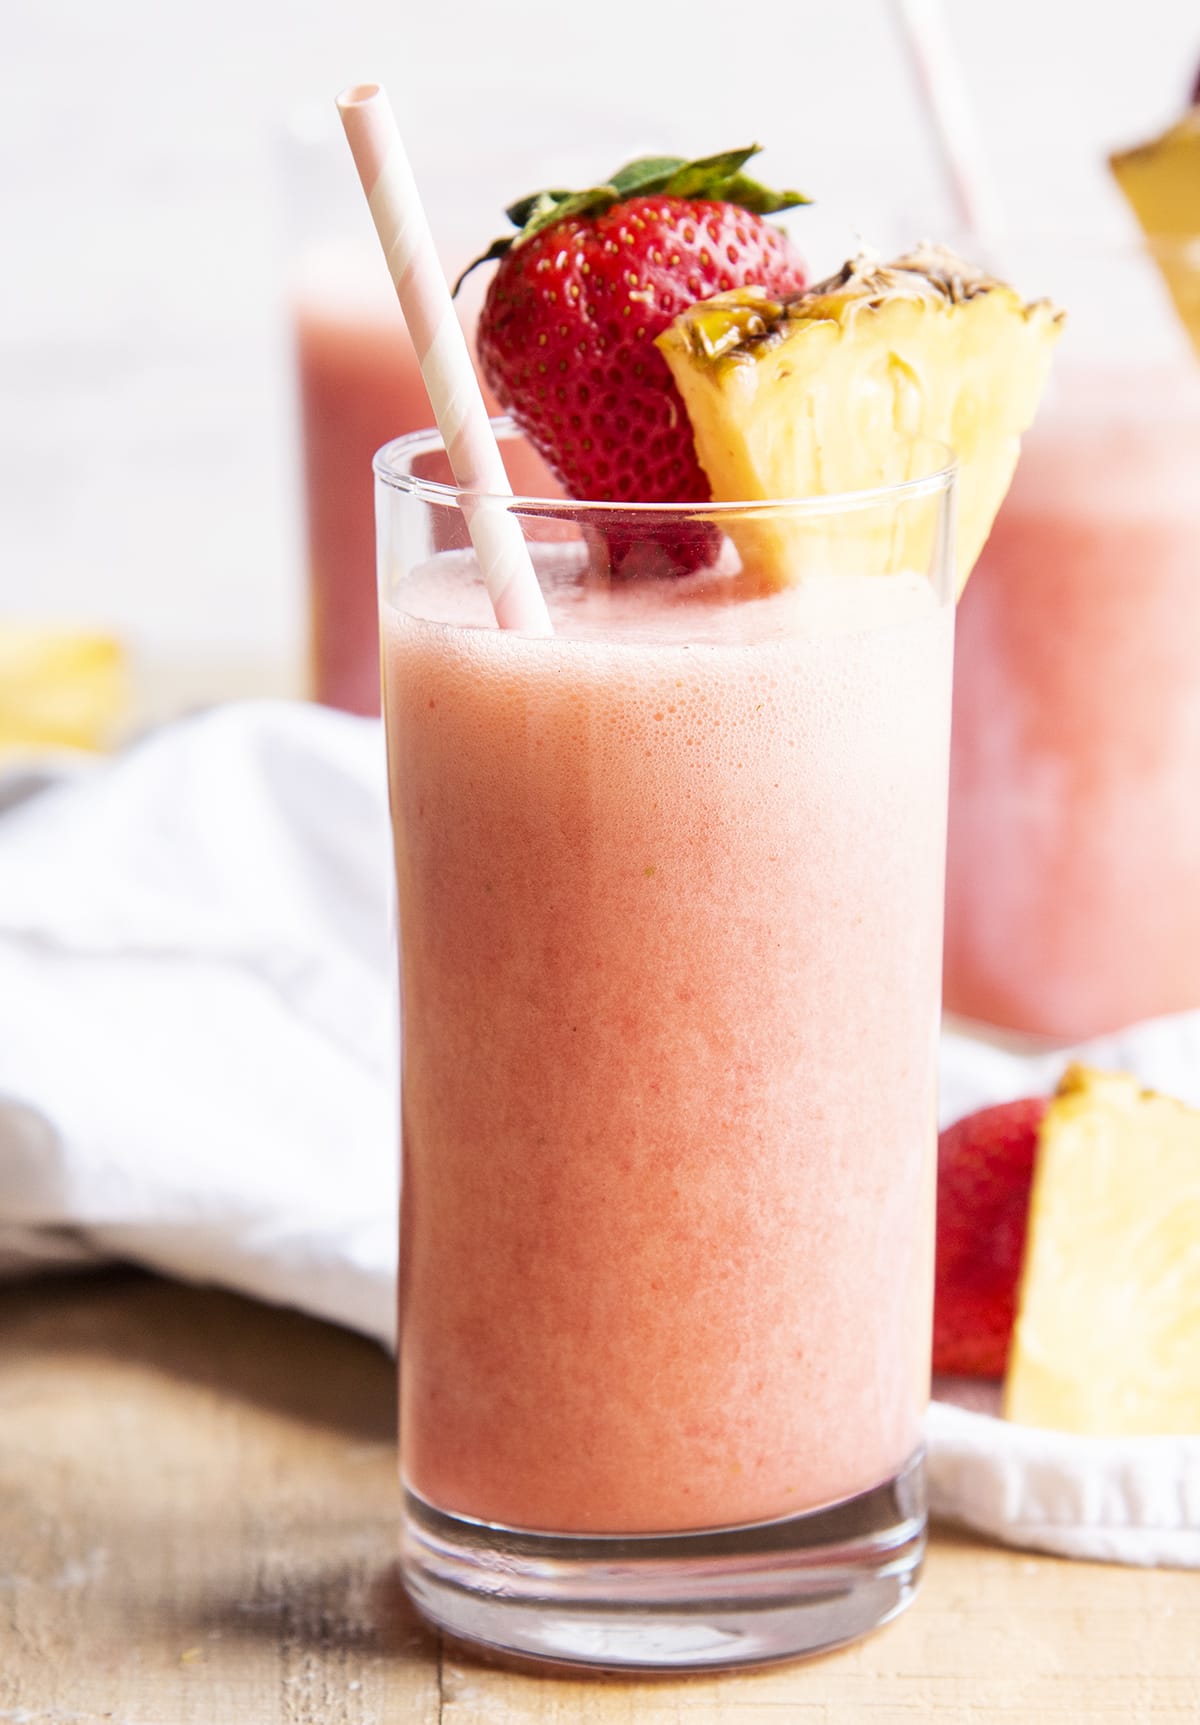 A glass of a pink strawberry blonde drink topped with a pineapple wedge, and a strawberry.